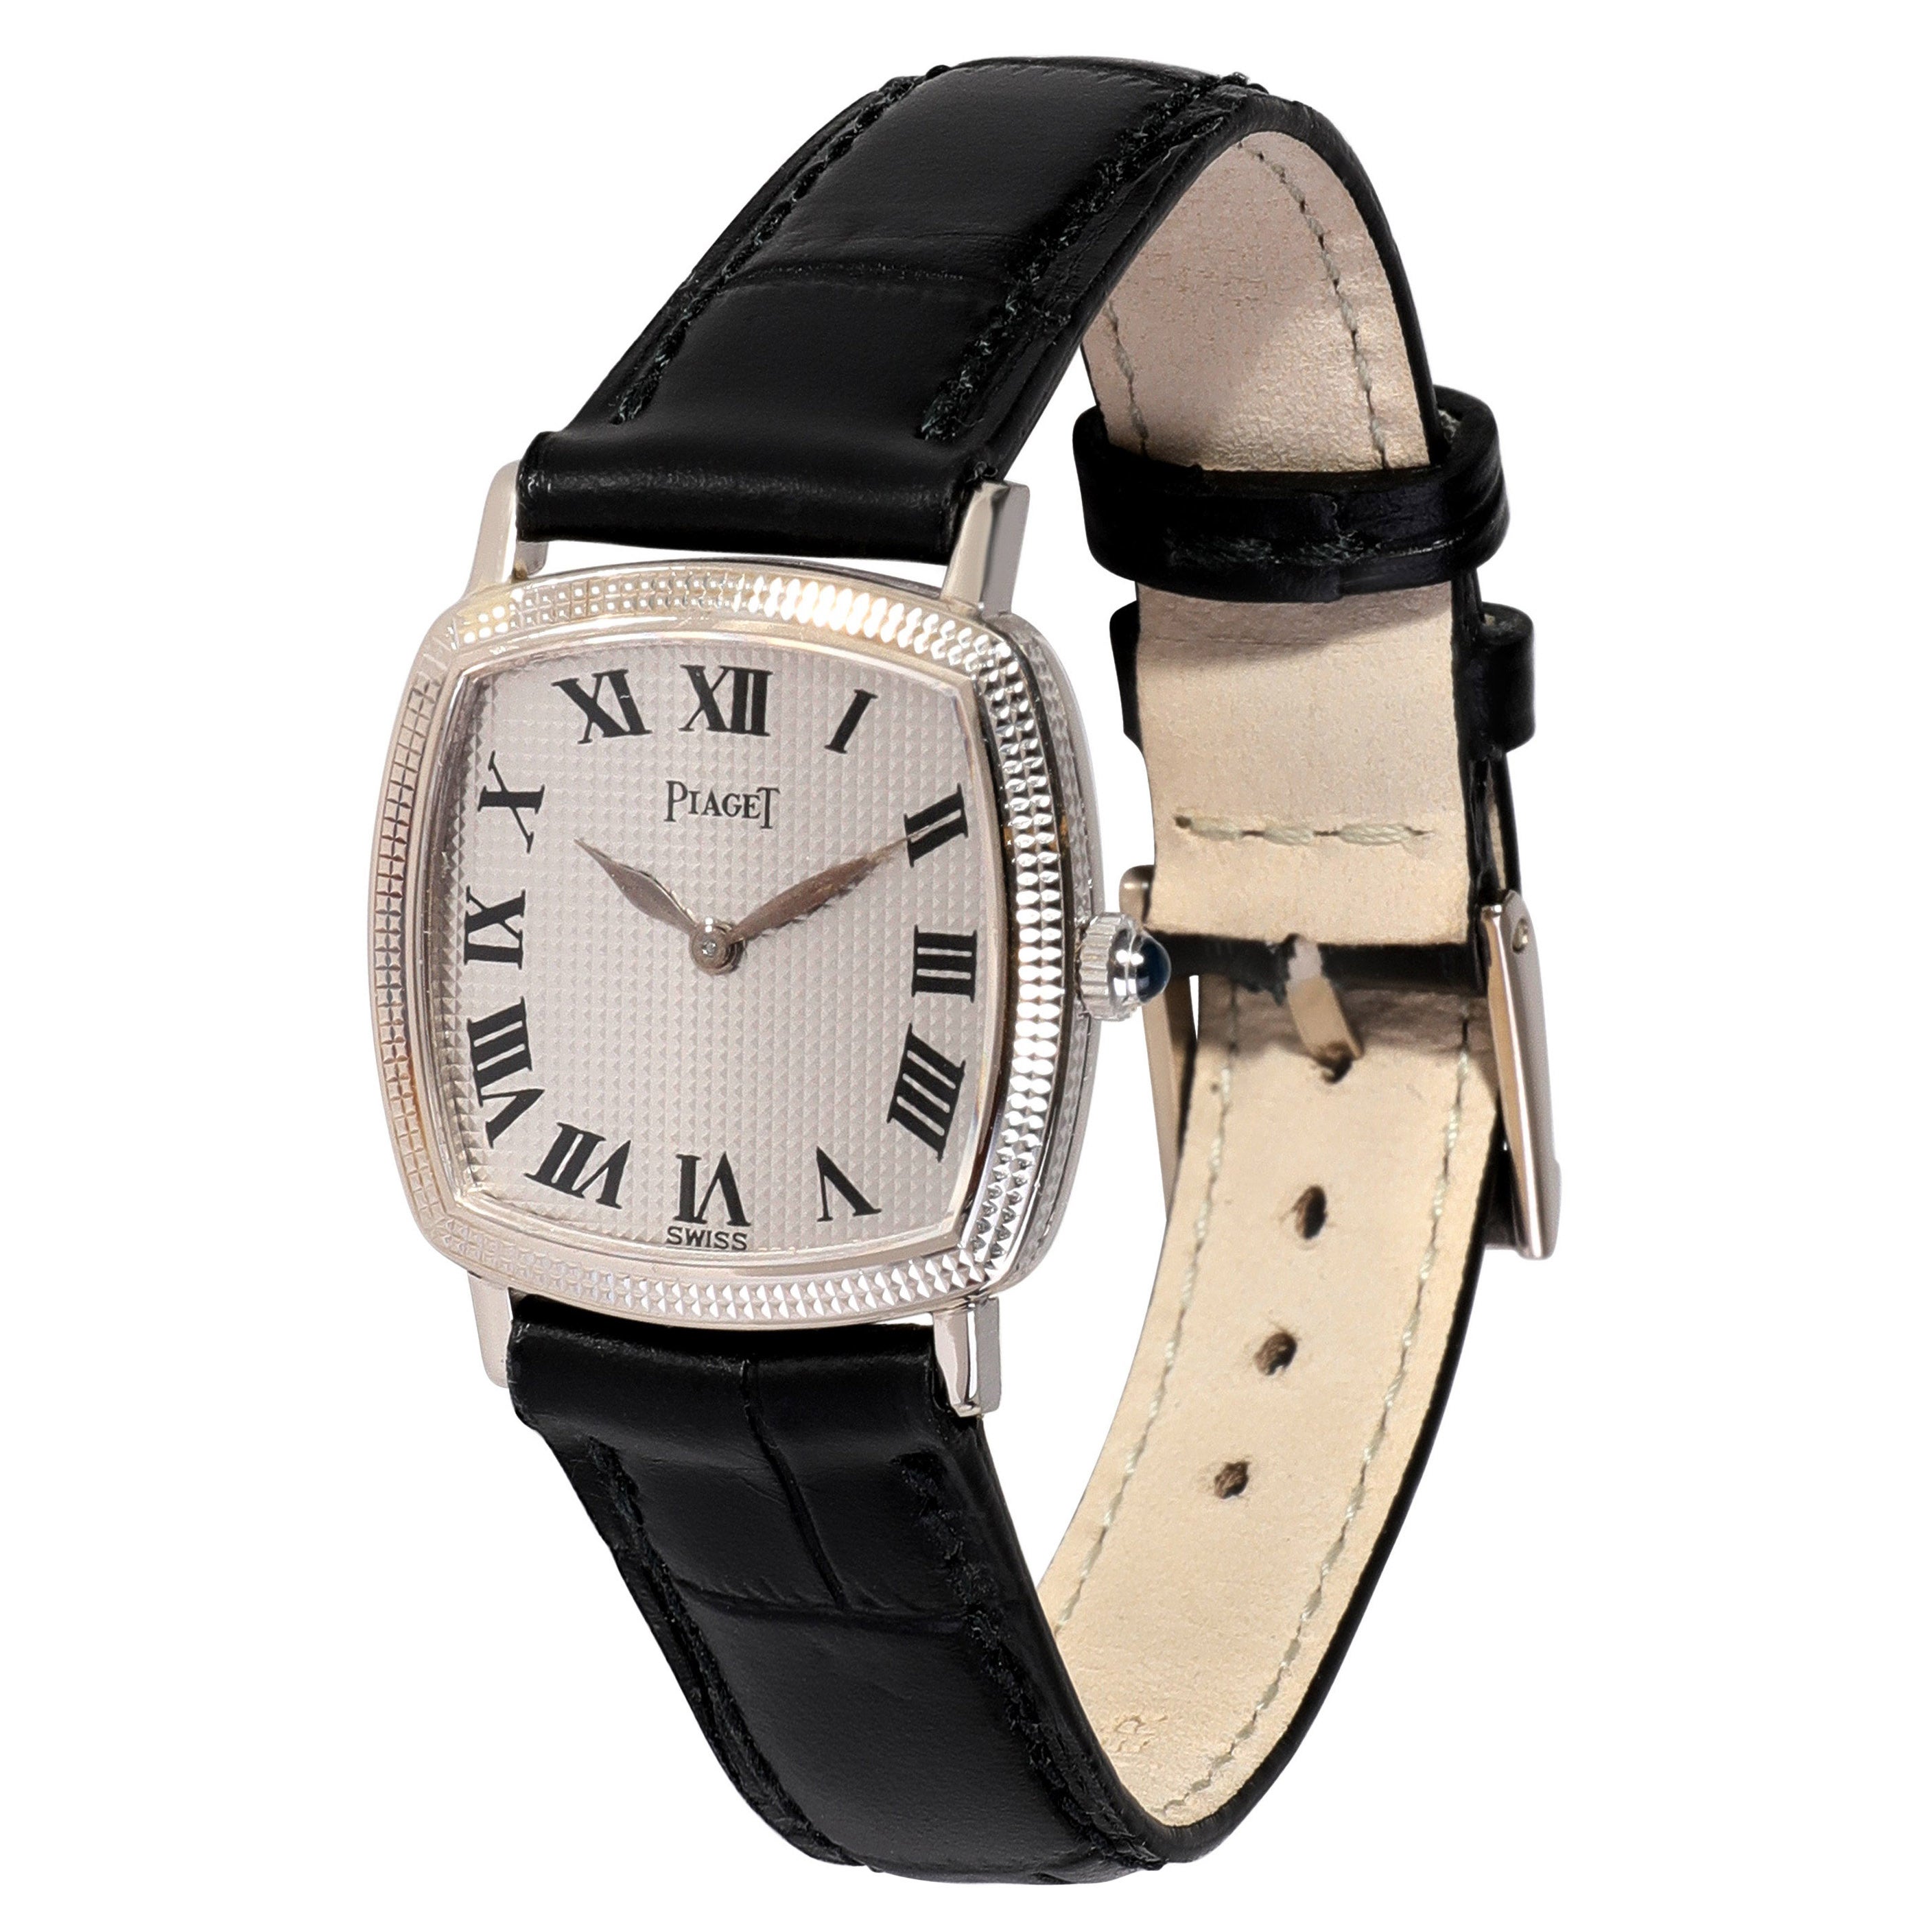 Piaget Classique 9240 Women's Watch in 18kt White Gold